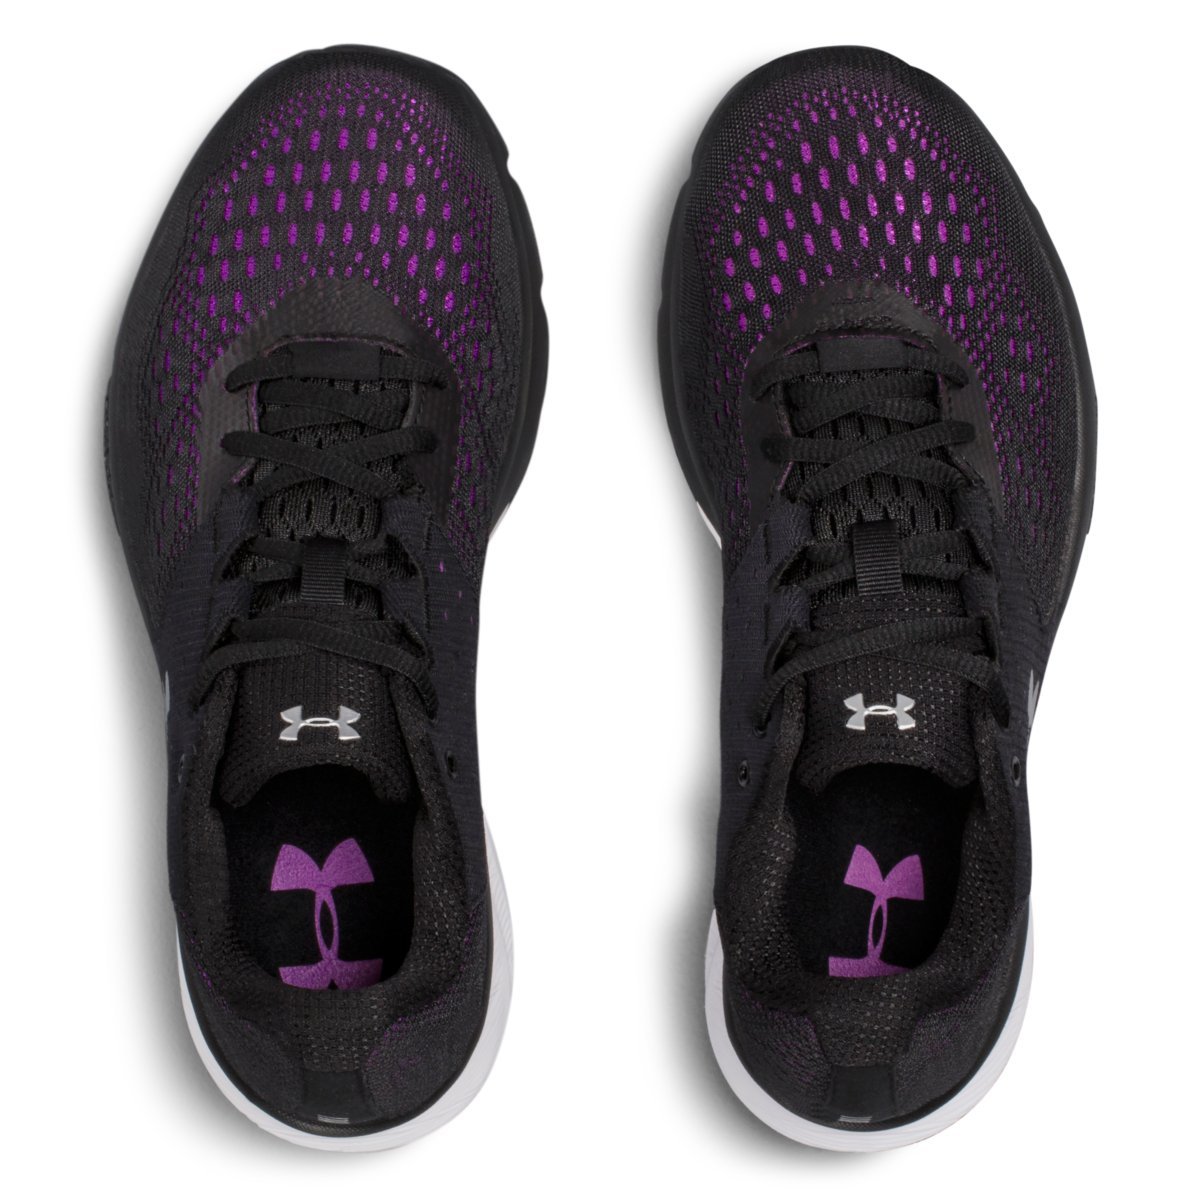 black under armour shoes womens